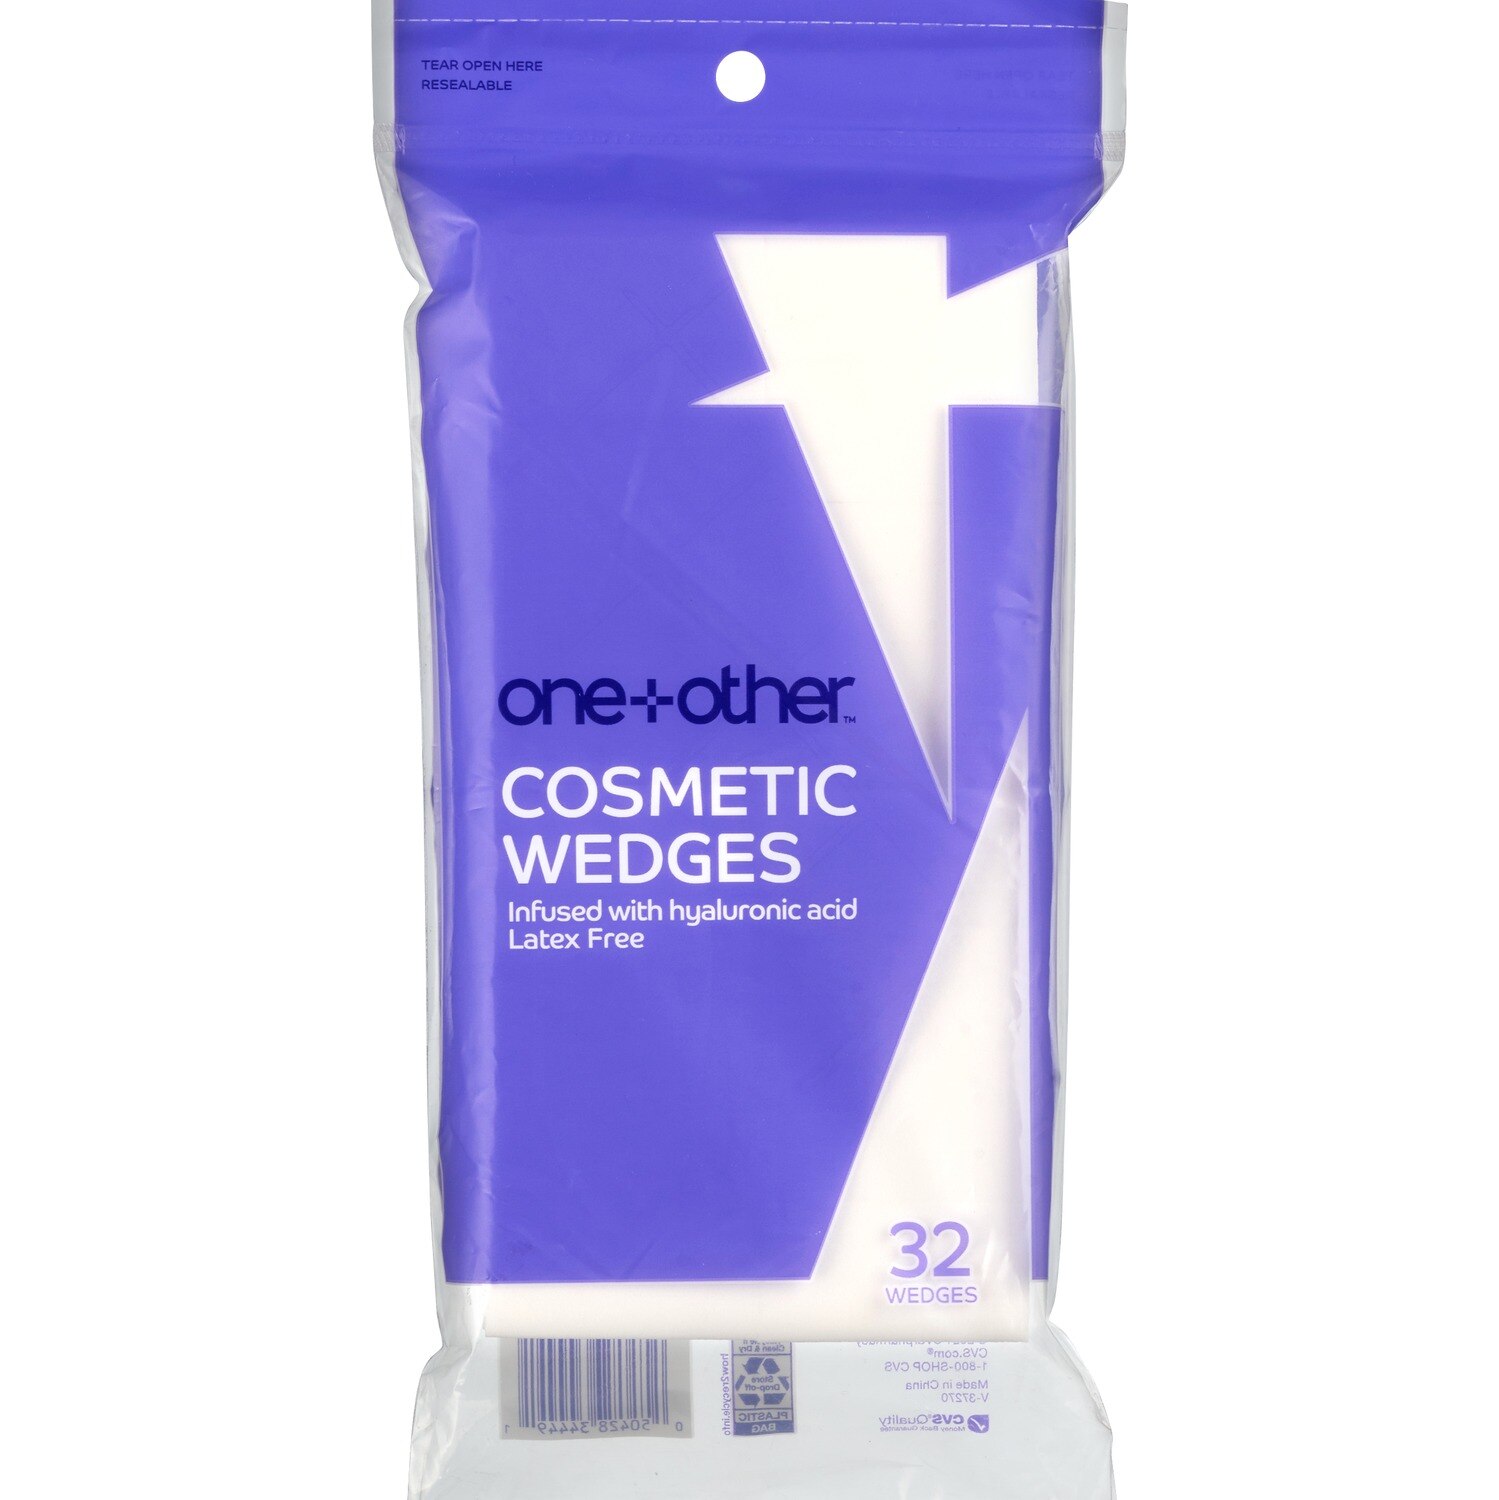 one+other Cosmetic Wedges, 32CT